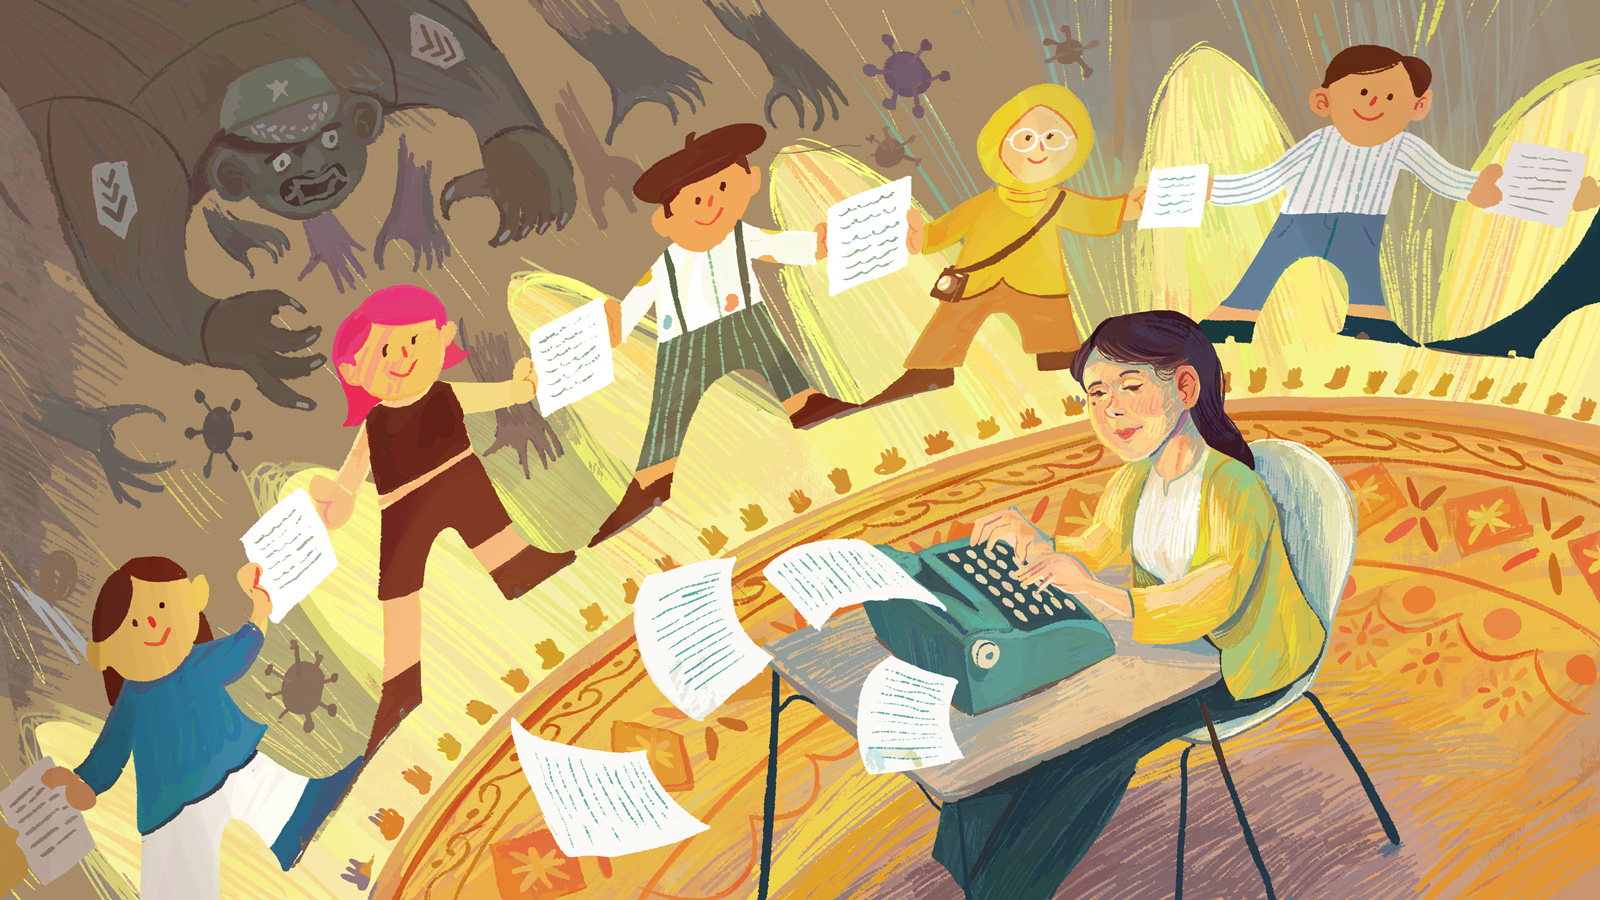 A woman with long dark brown hair in a yellow cardigan, white shirt, and dark green skirt types away at a typewriter. Around her, other media workers form a ring of protection. Outside the ring, demon-like figures reach out towards the media workers.